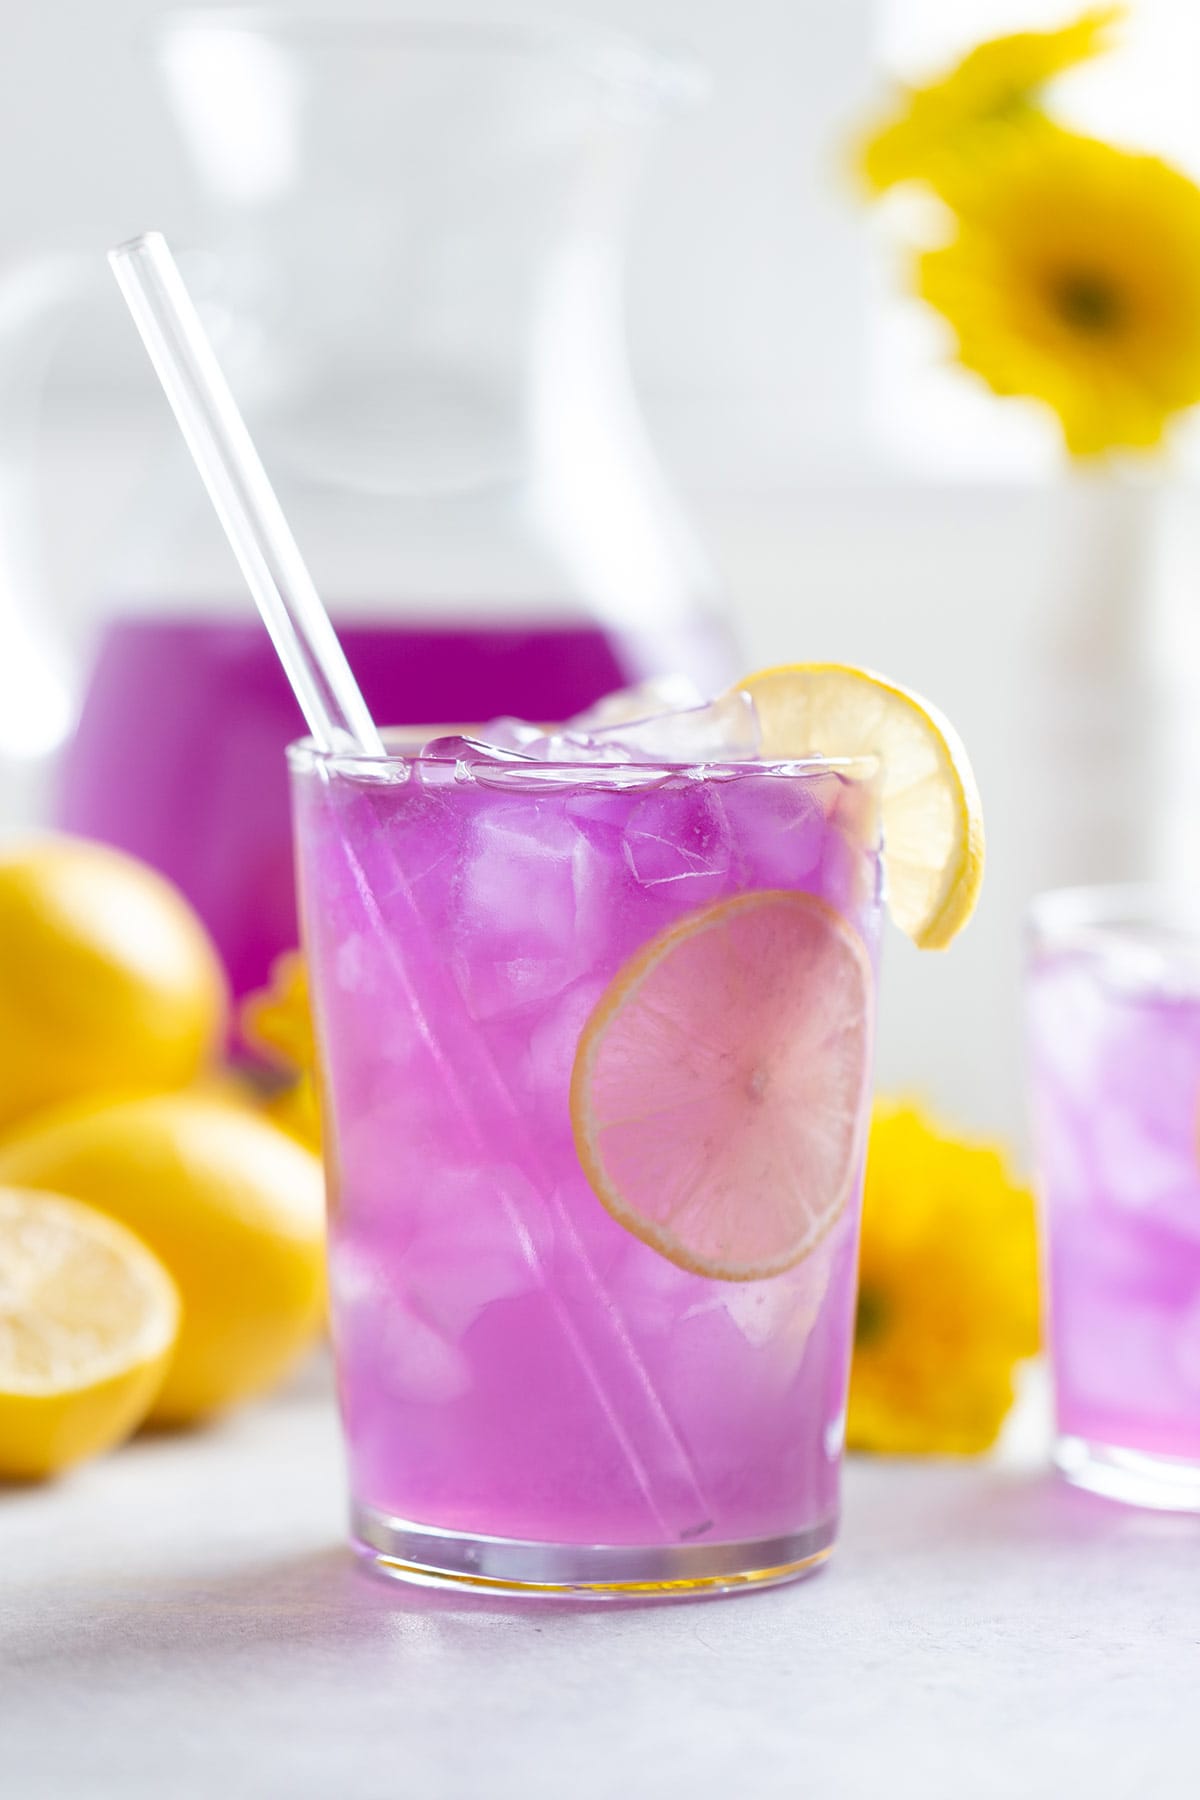 Bright purple lemonade in a tall glass with ice garnished with lemon slices and a glass straw.